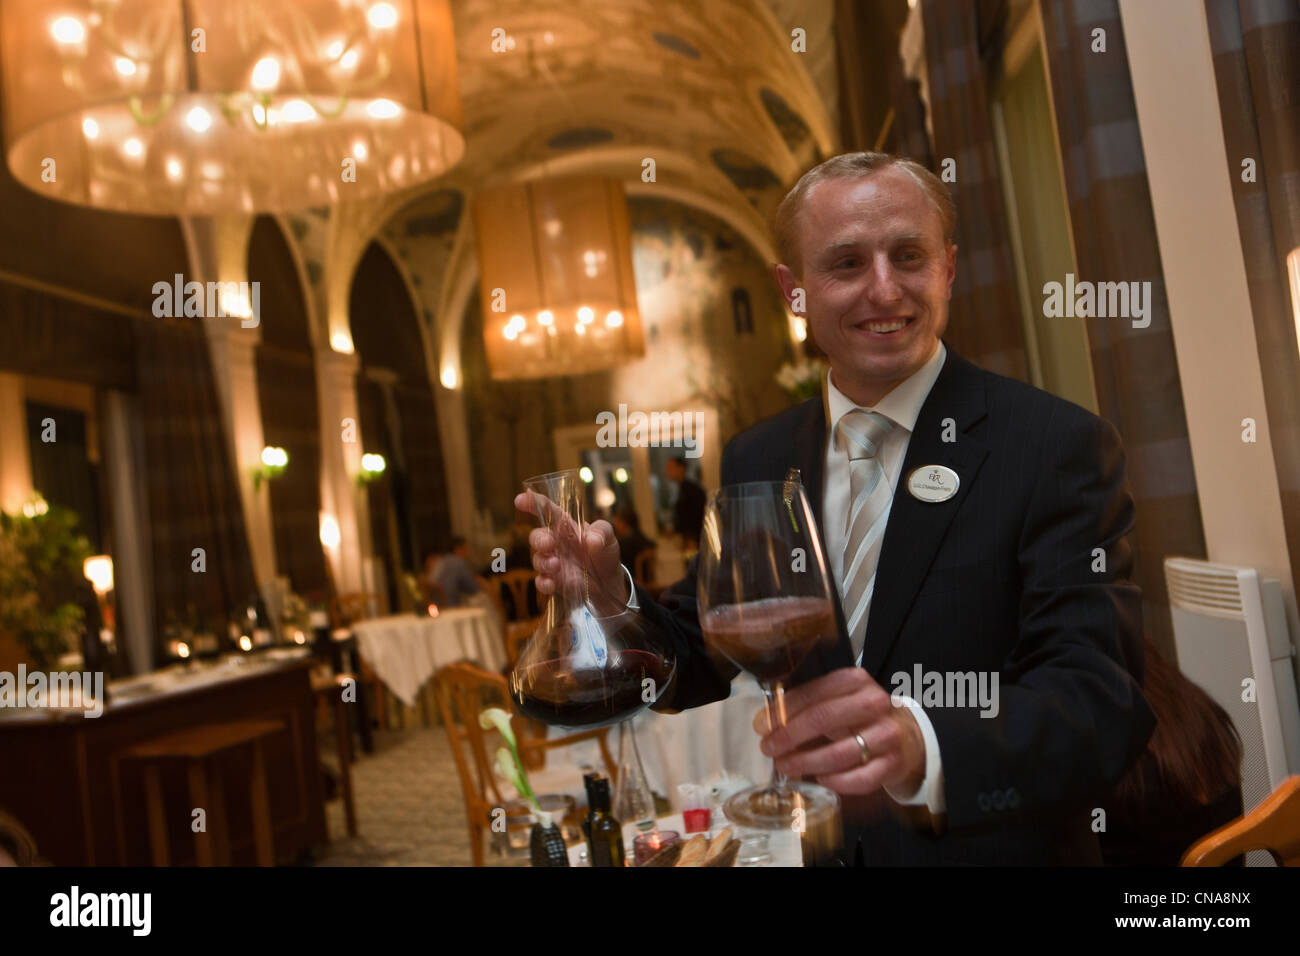 France, Haute Savoie, Evian les Bains, the sommelier at the restaurant at the Hotel Edouard VII, Evian Royal Resort Stock Photo